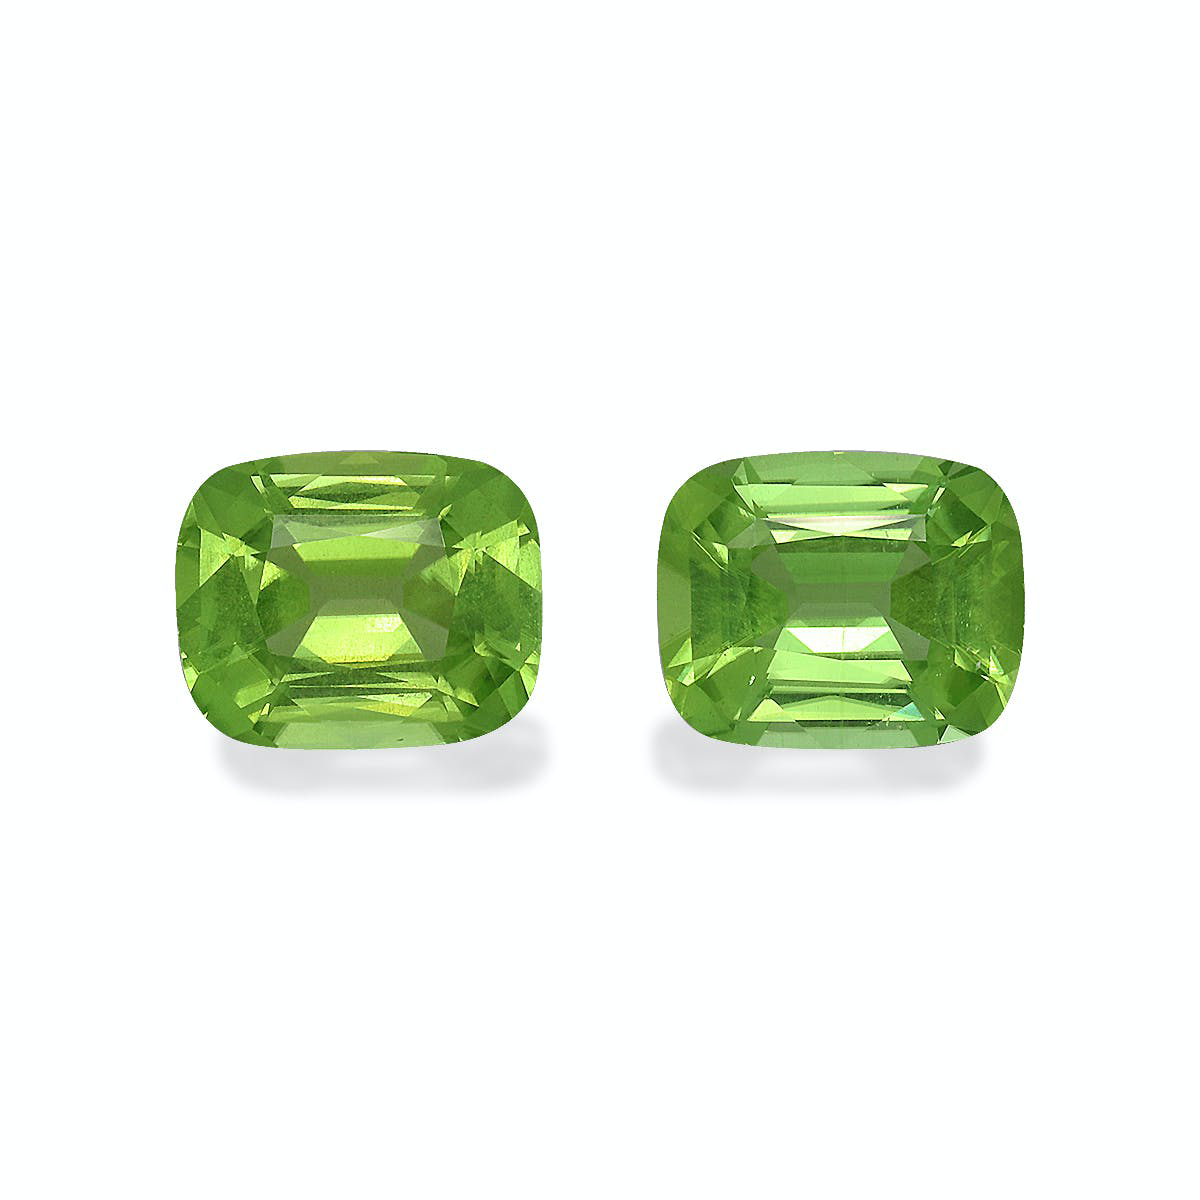 Picture of Green Peridot 6.03ct - 10x8mm Pair (PD0148)